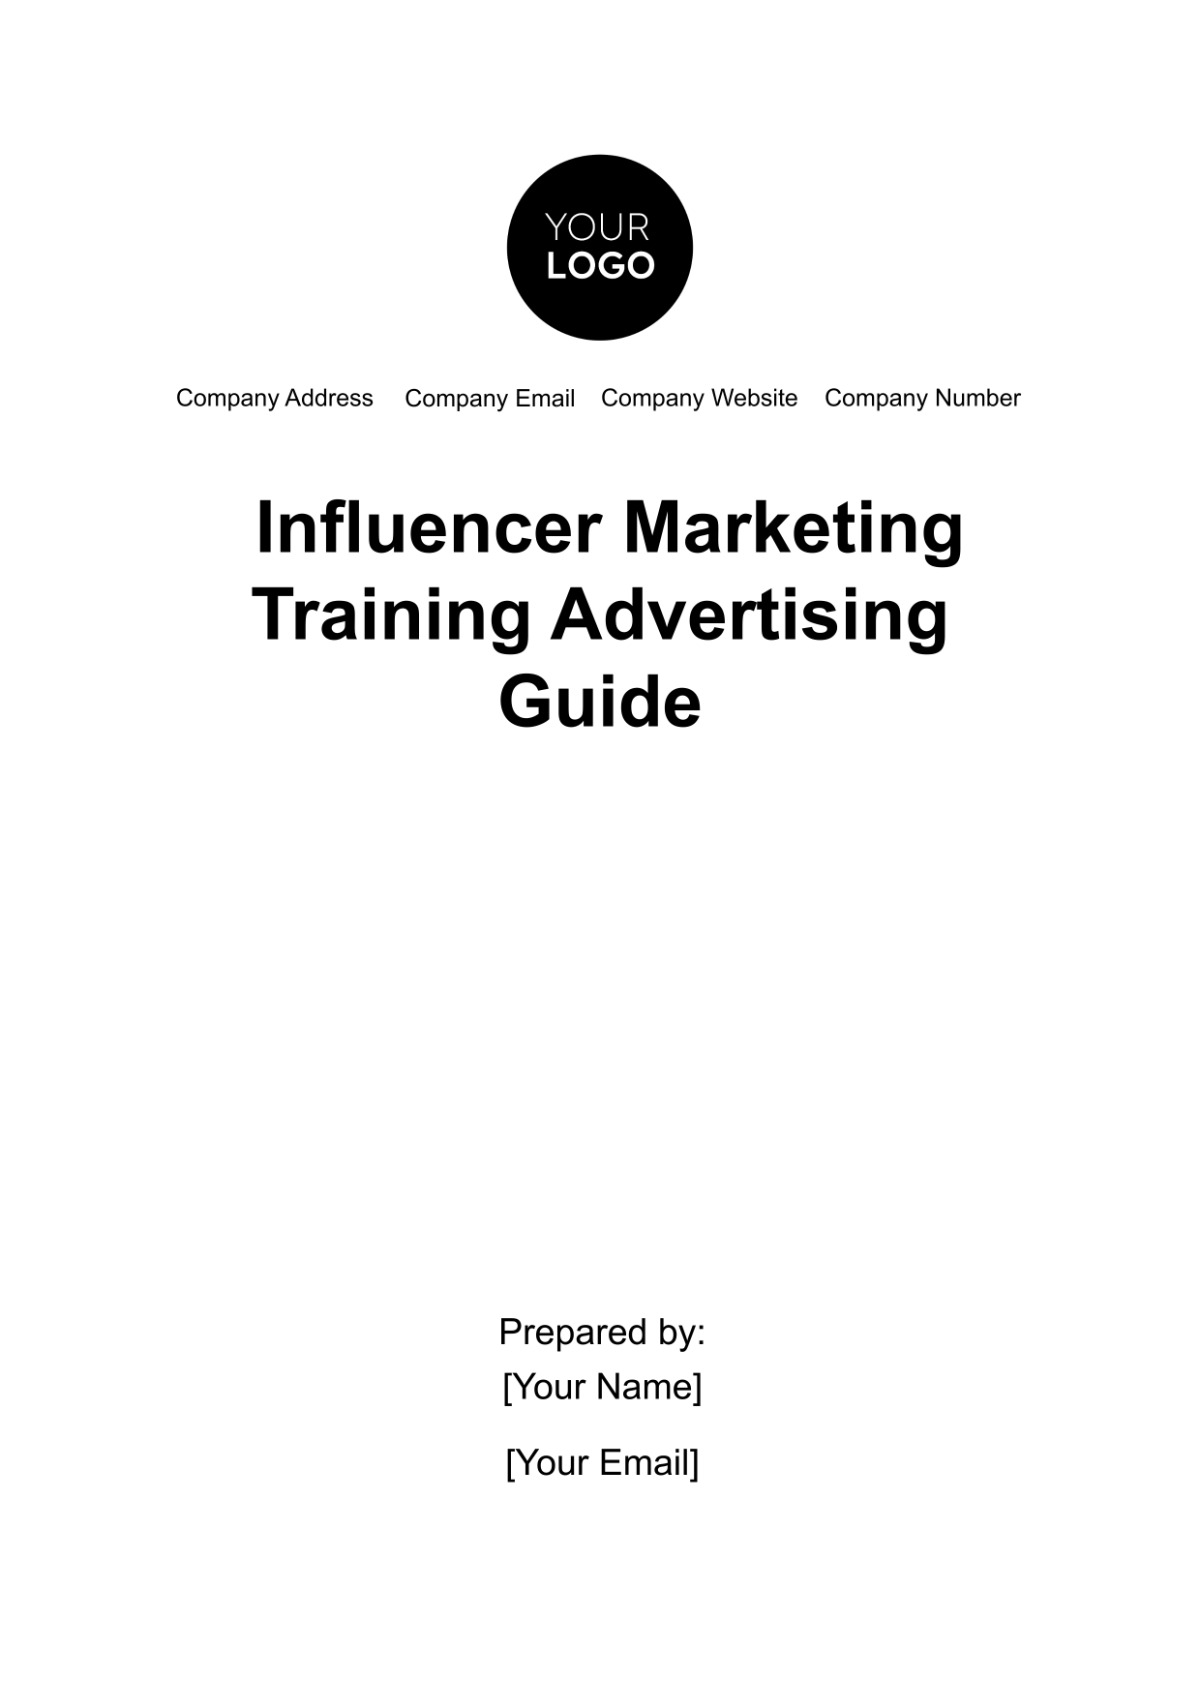 Free Influencer Marketing Training Advertising Guide Template